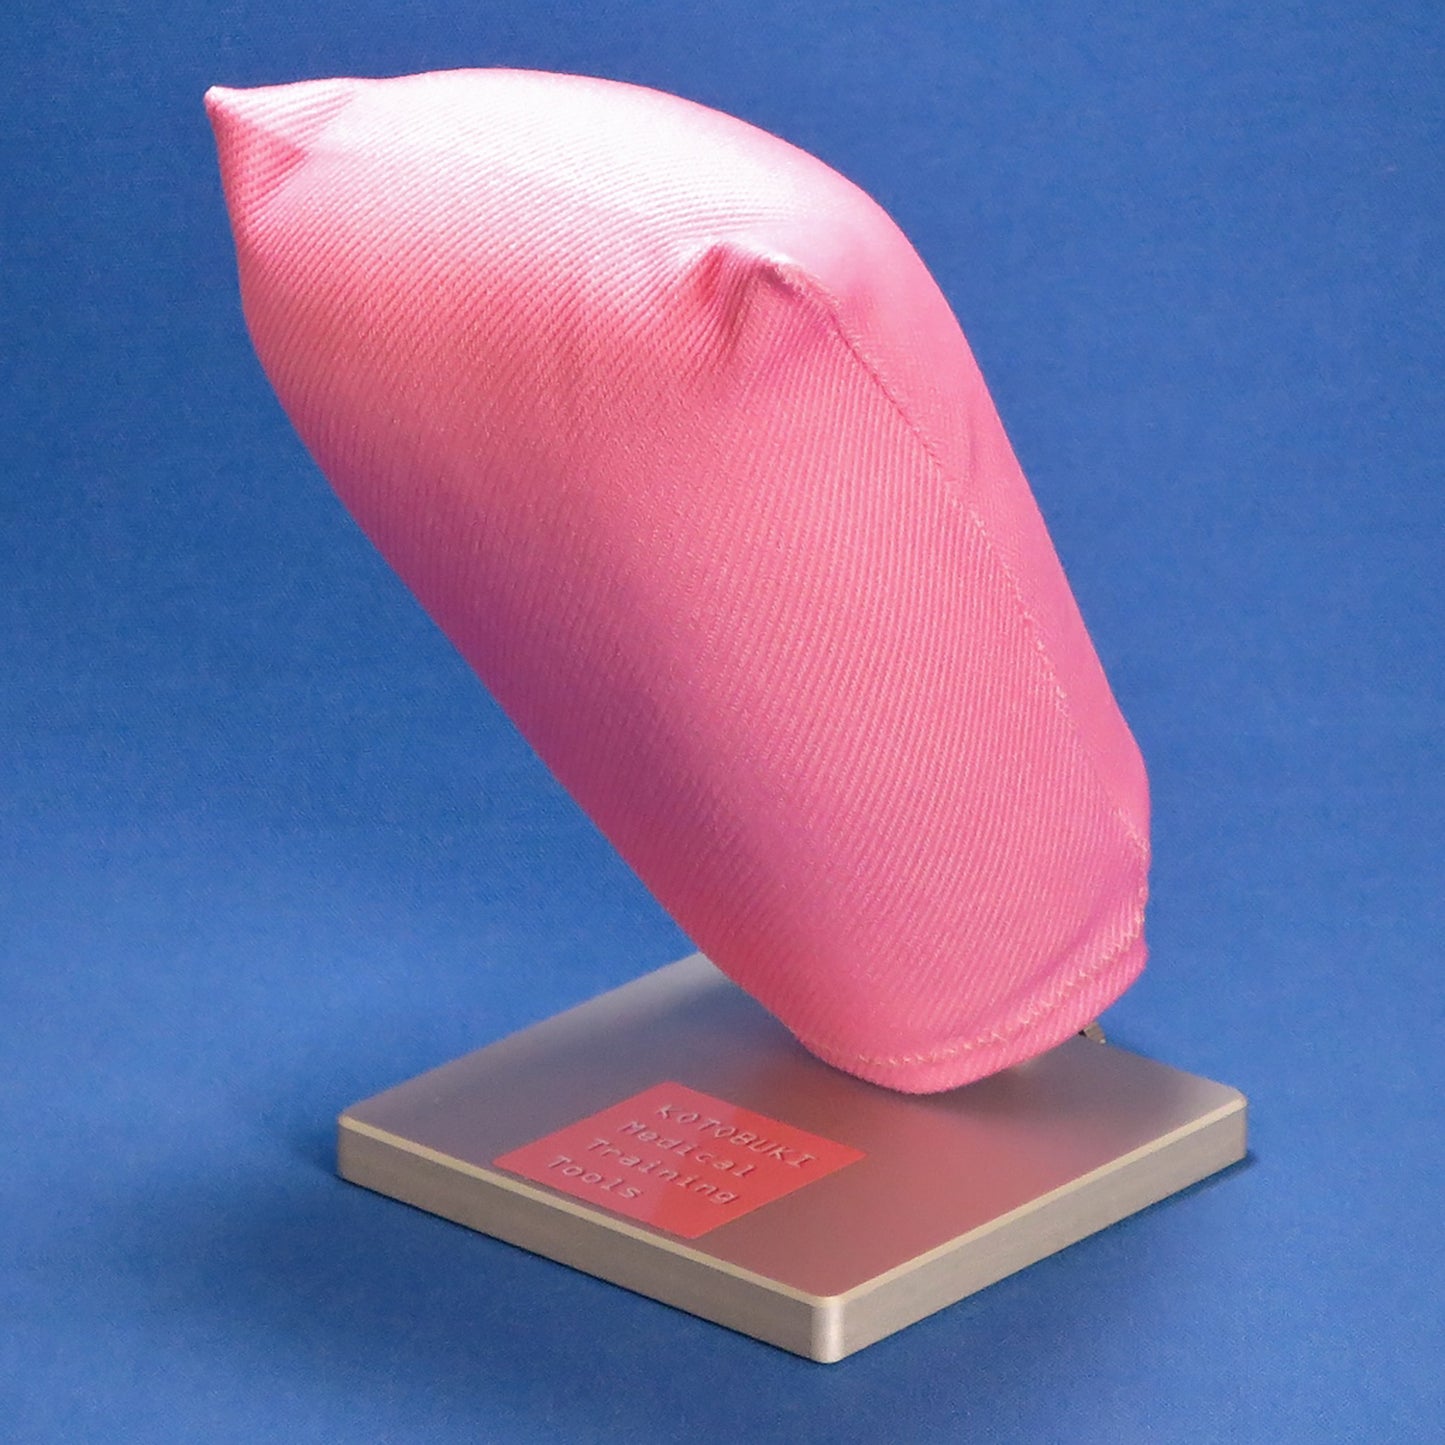 A pink, synthetic vaginal stump used for hysterectomy ligature training.